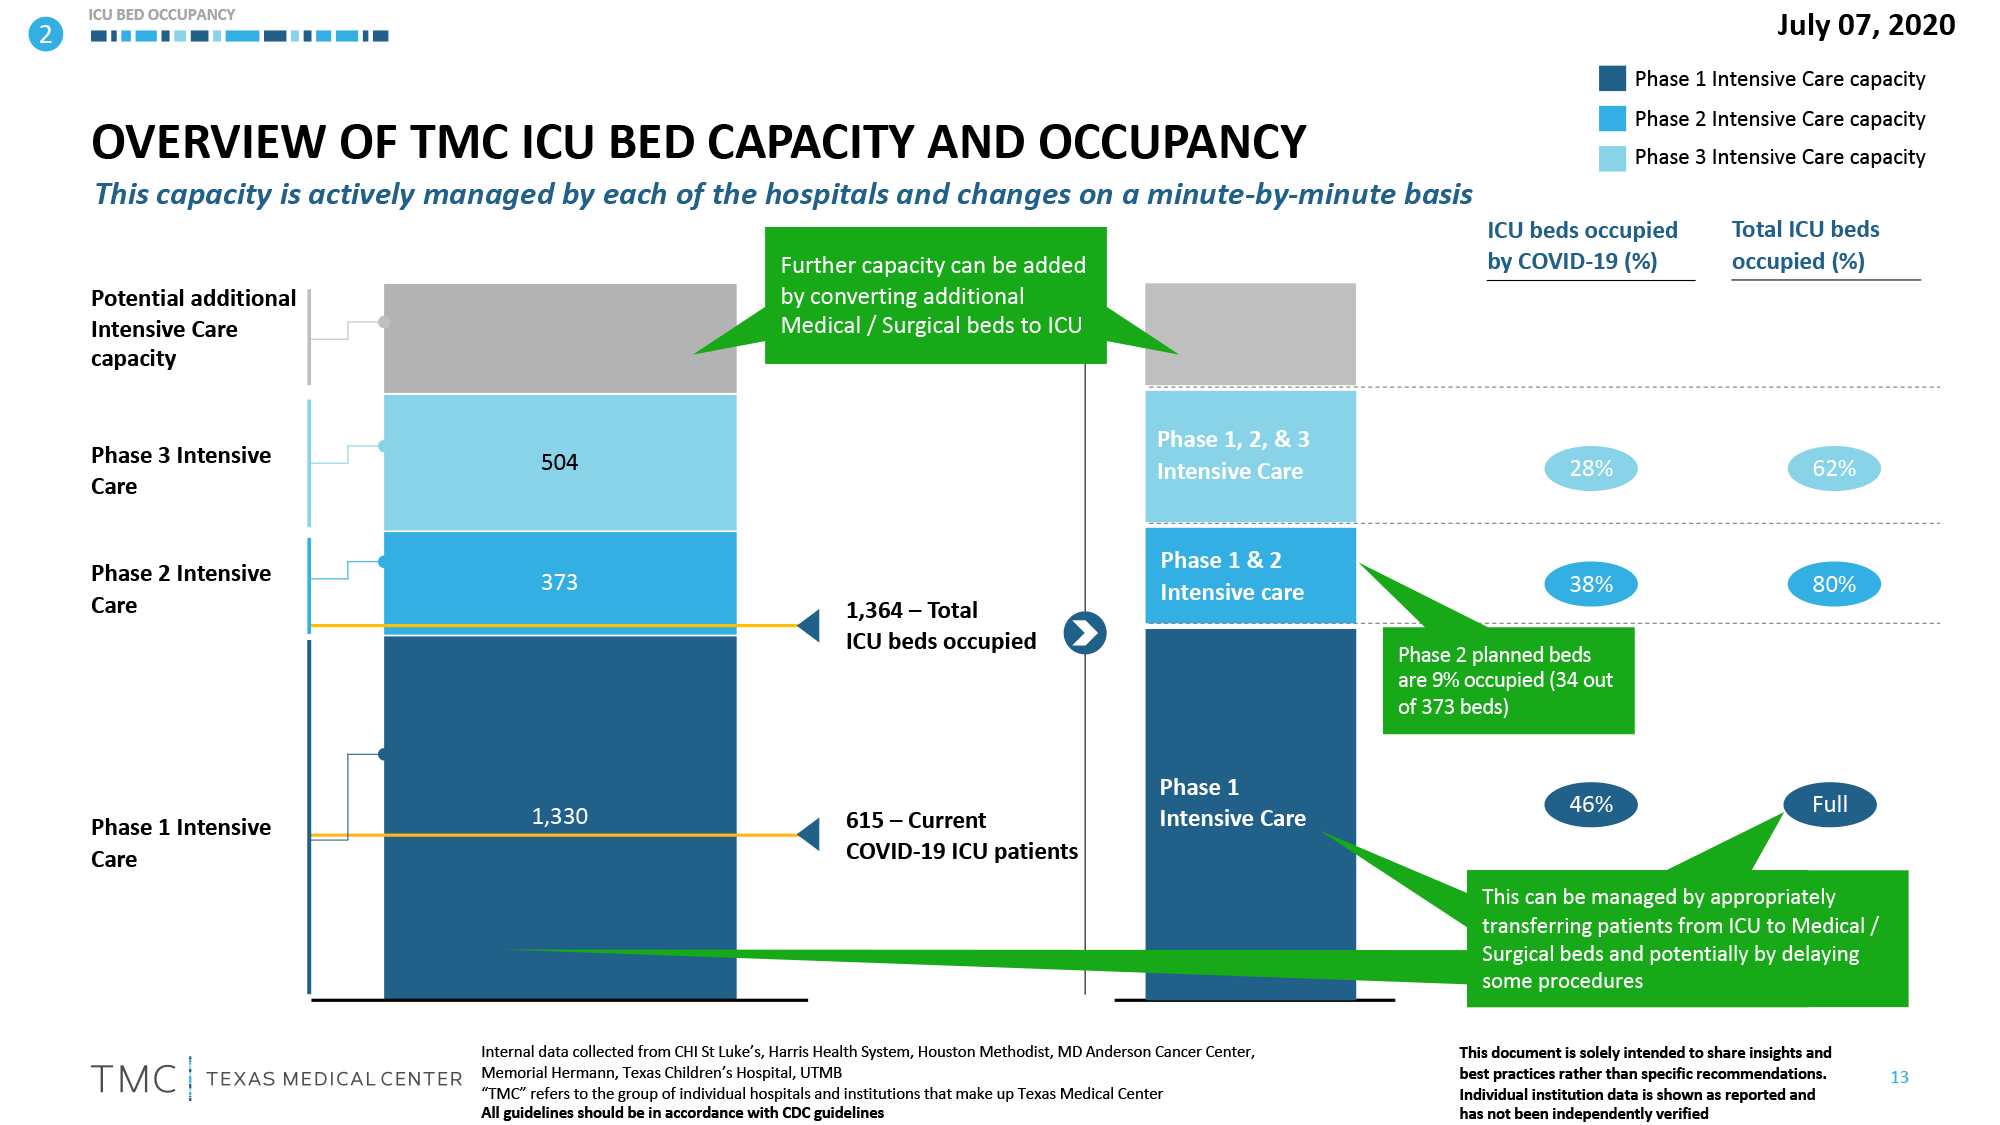 l-Overview-Of-TMC-ICU-Bed-Capacity-And-Occupancy-7-8-2020.png